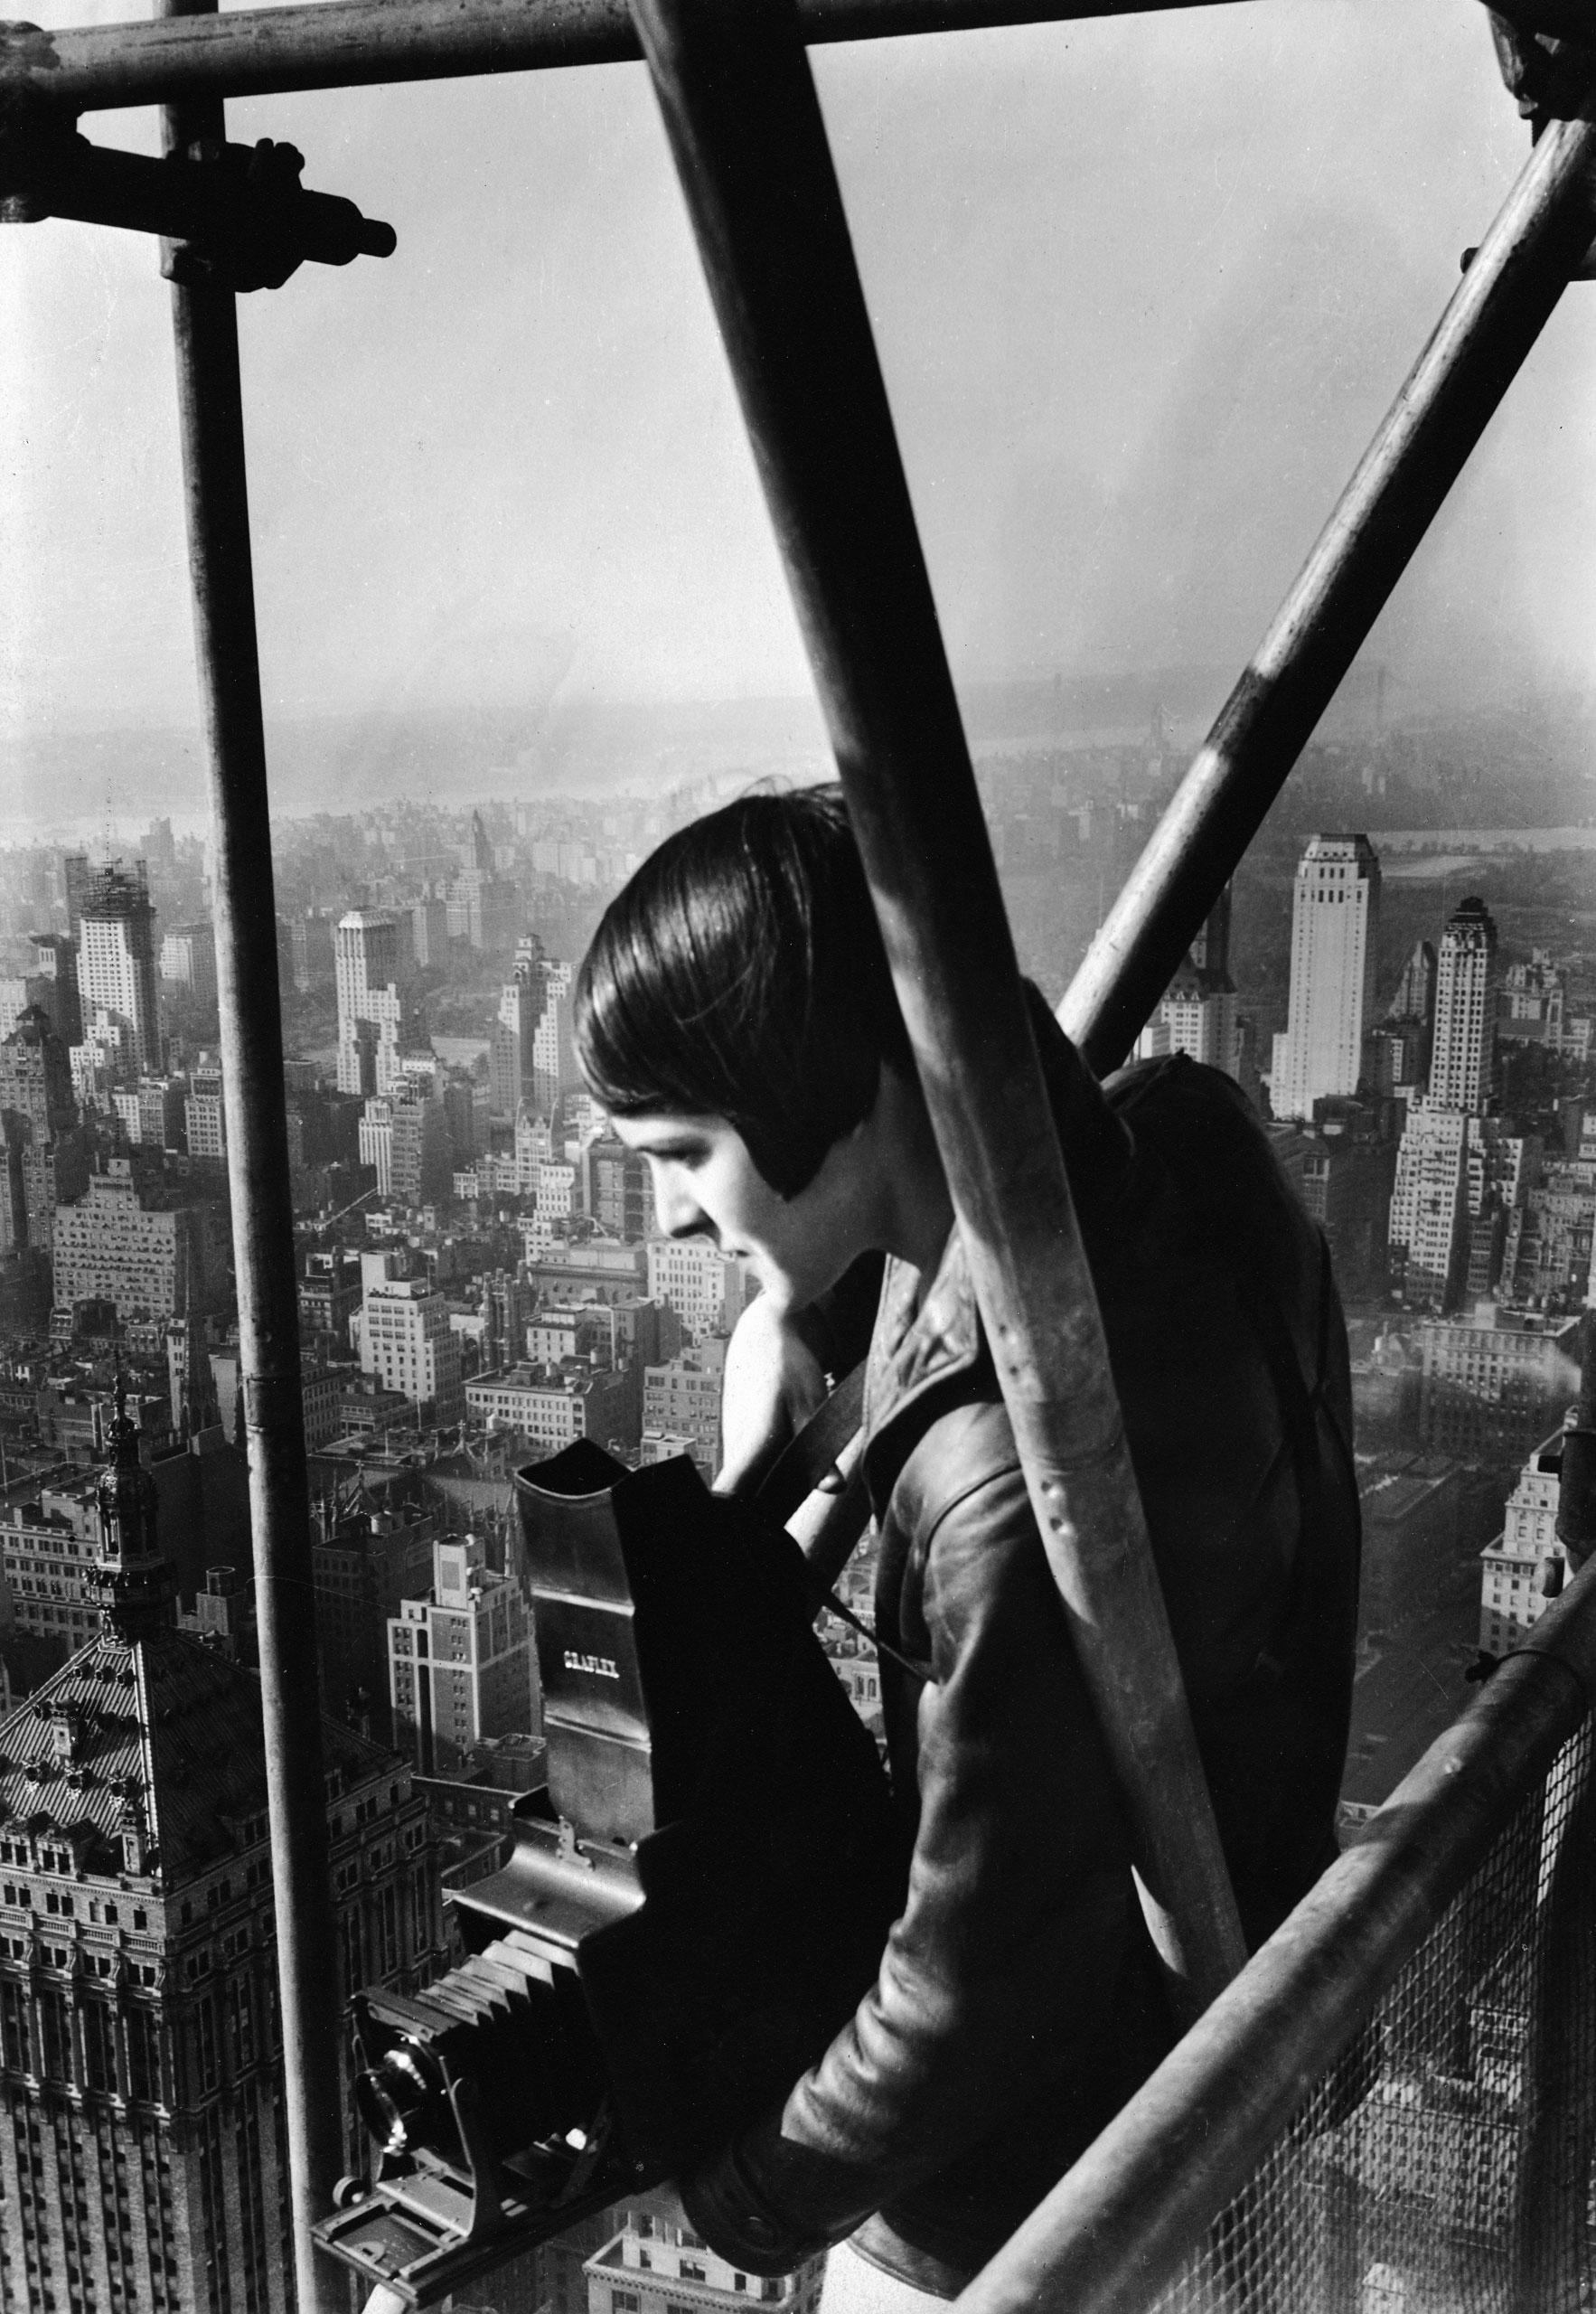 Margaret Bourke-White, 27, stands on the scaffolding enclosing the under-construction Chrysler Building in New York, 1931.